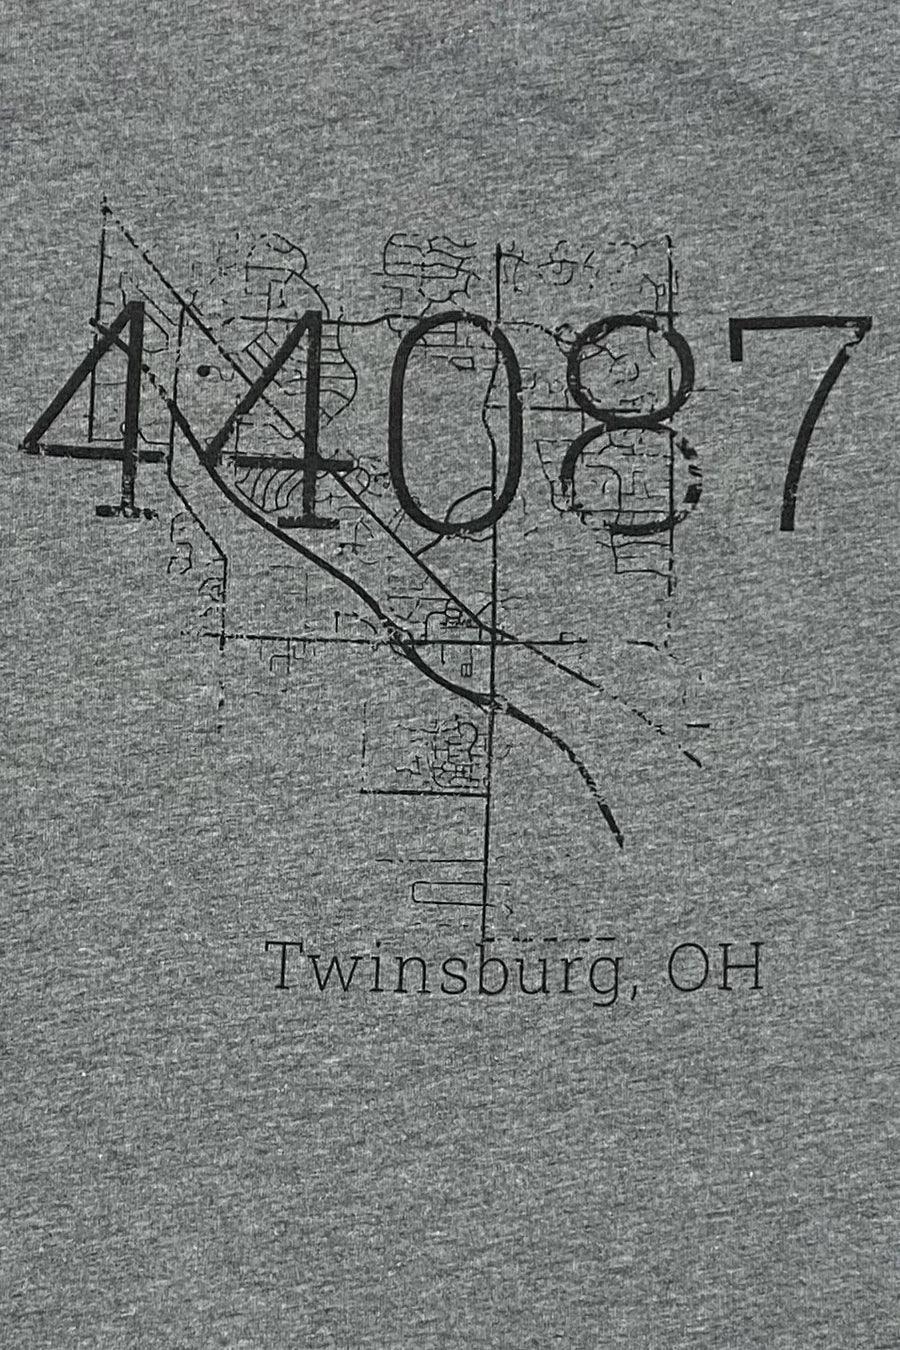 Light Grey Twinsburg Unisex Shirts-Size Large Only - Strawberry Moon Boutique